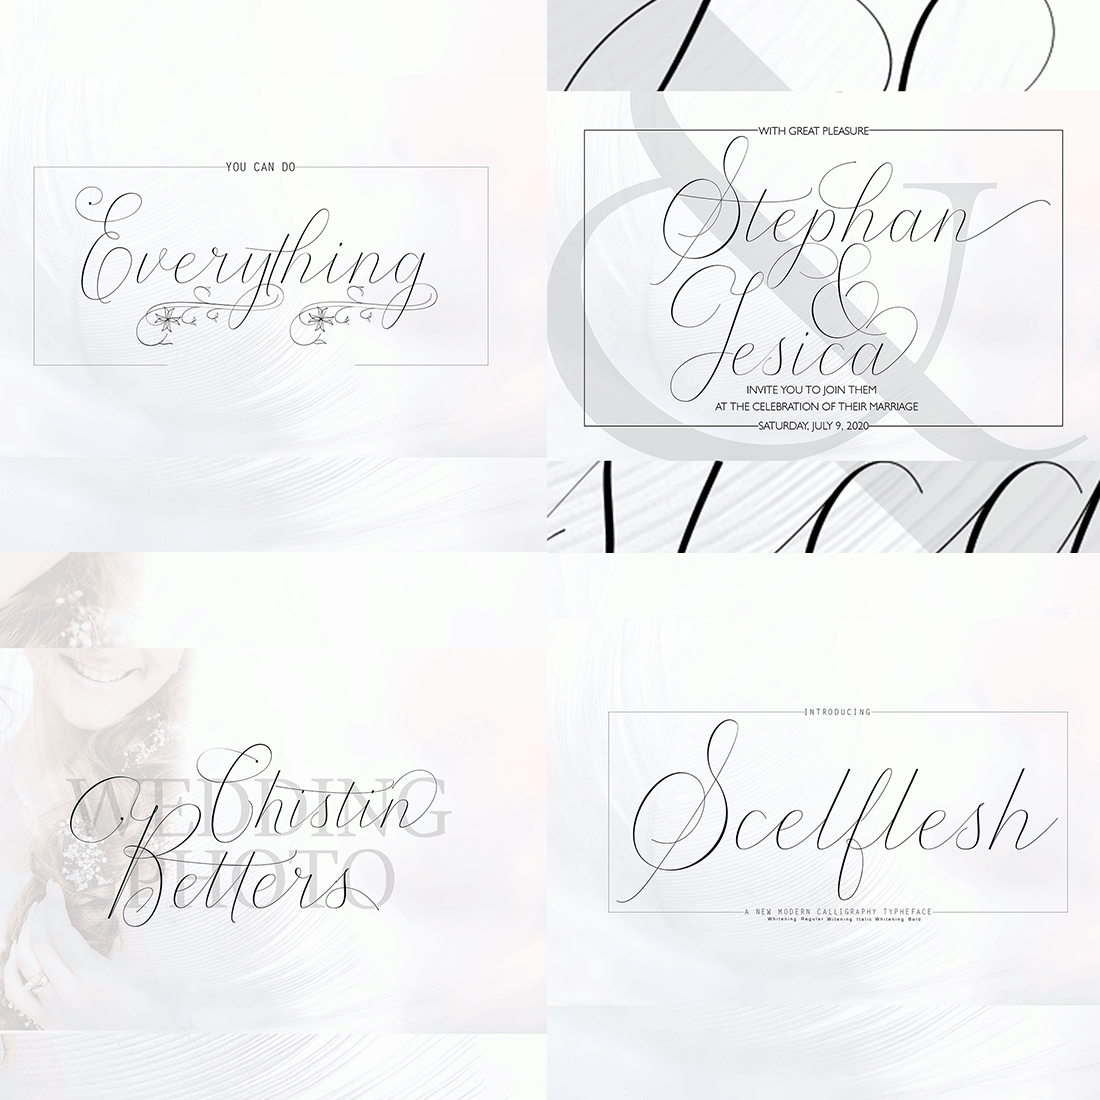 Everything Modern Calligraphy preview image.